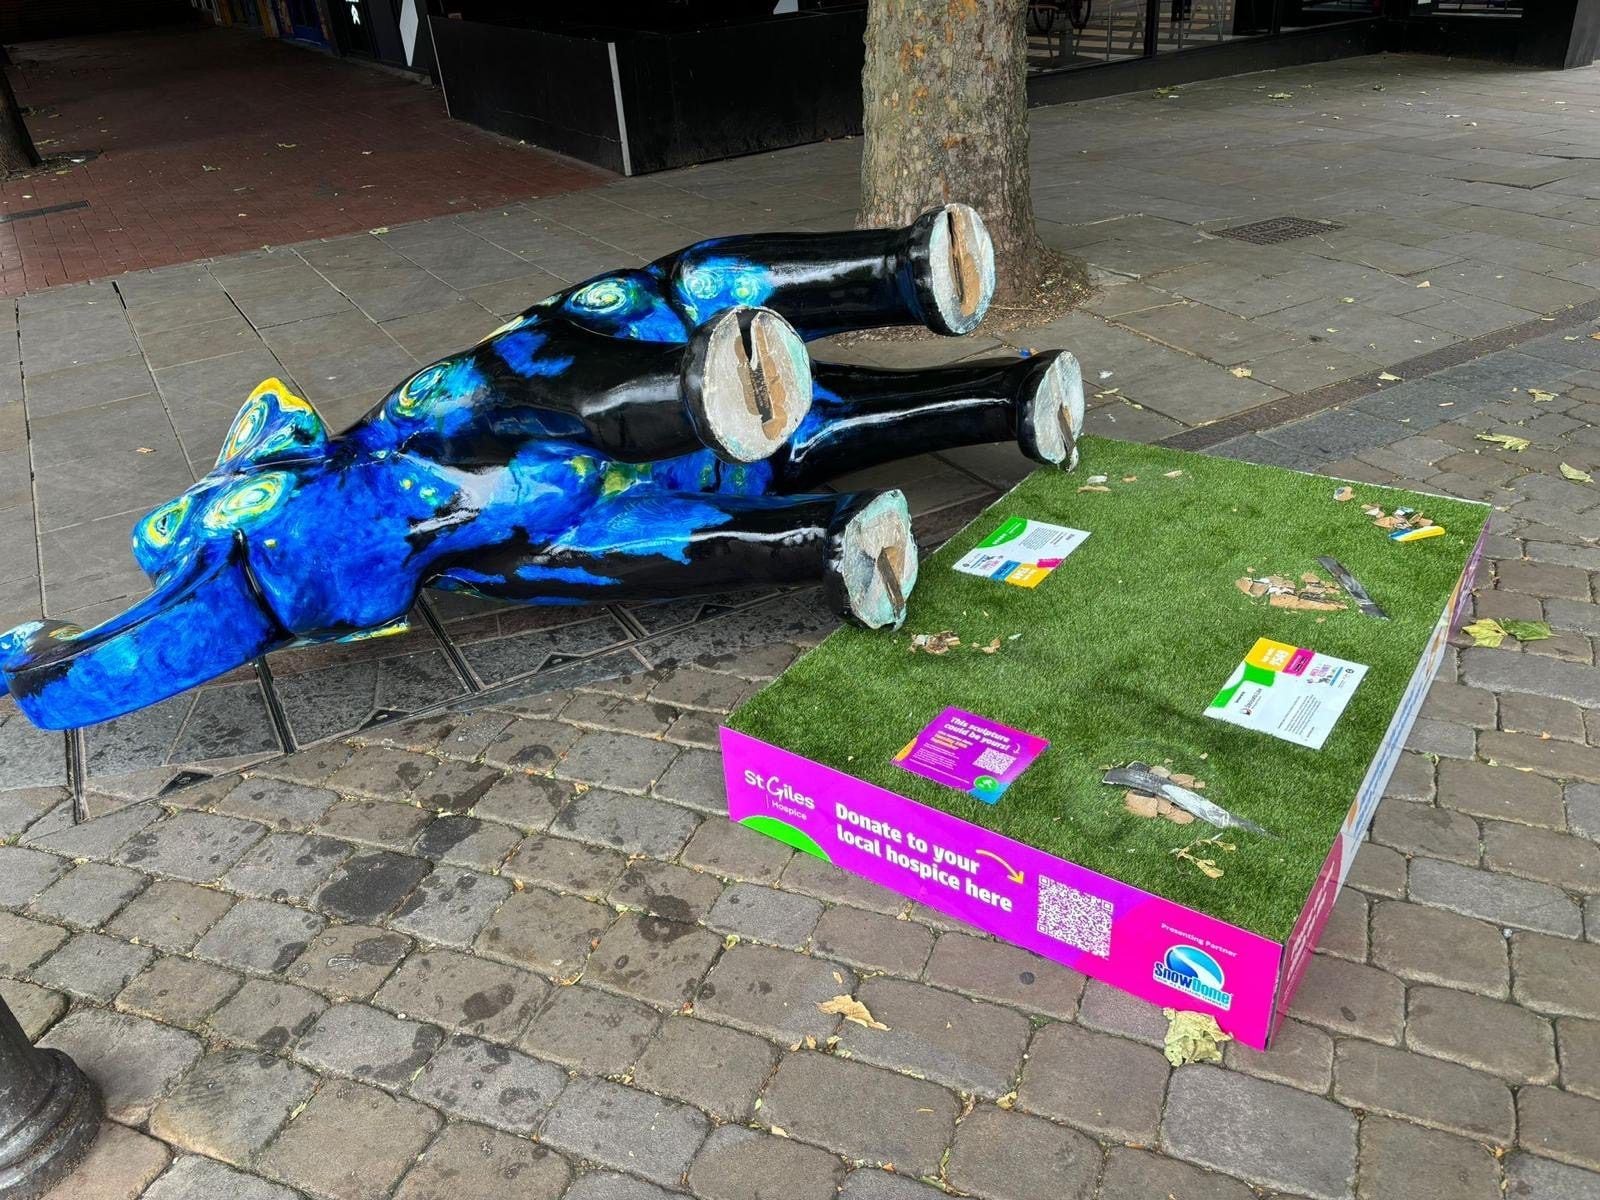 Elephant sculpture 'deliberately' damaged in Lichfield as charity art trail launched